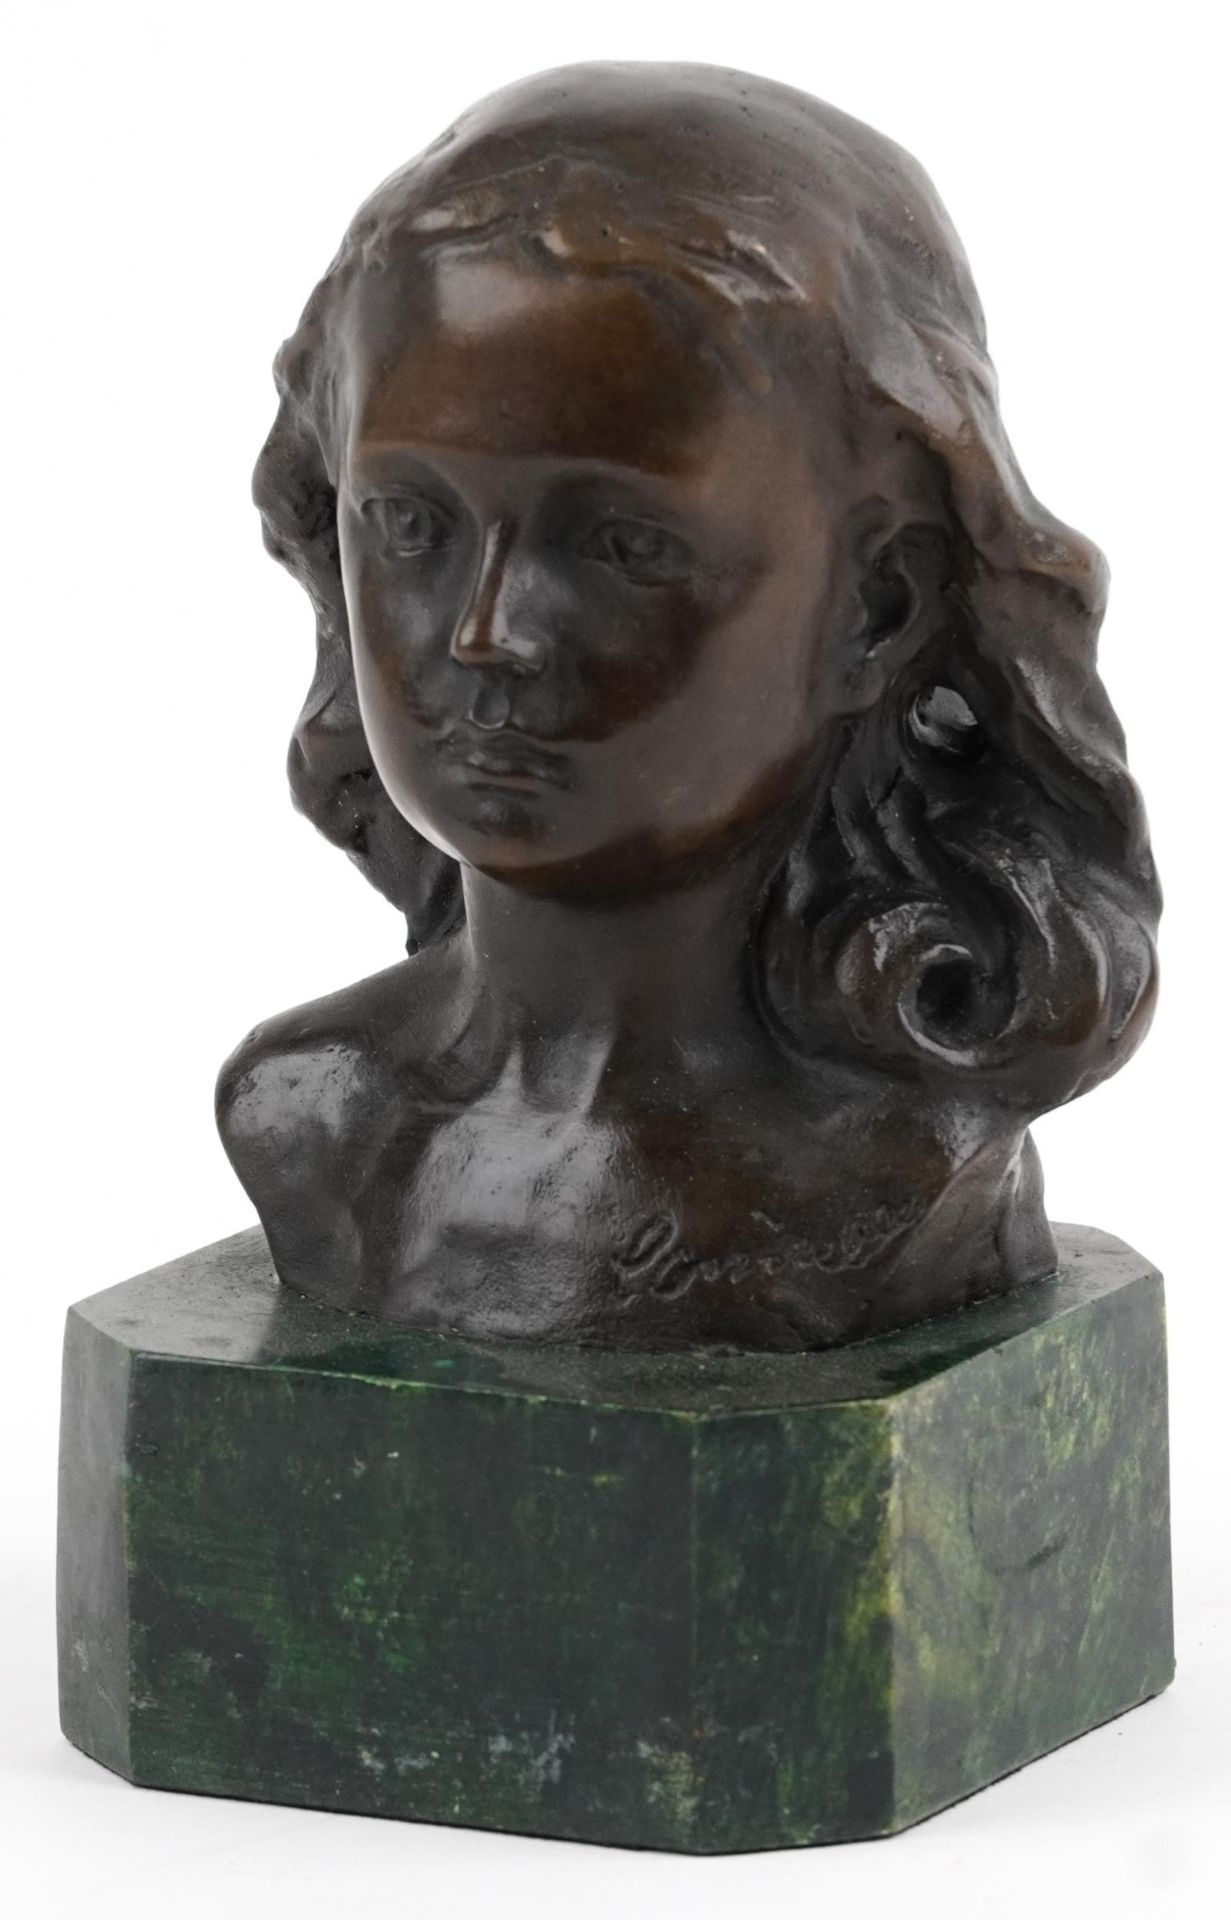 Patinated bronze head and shoulder bust of a young female raised on a green marbleised base, 15cm